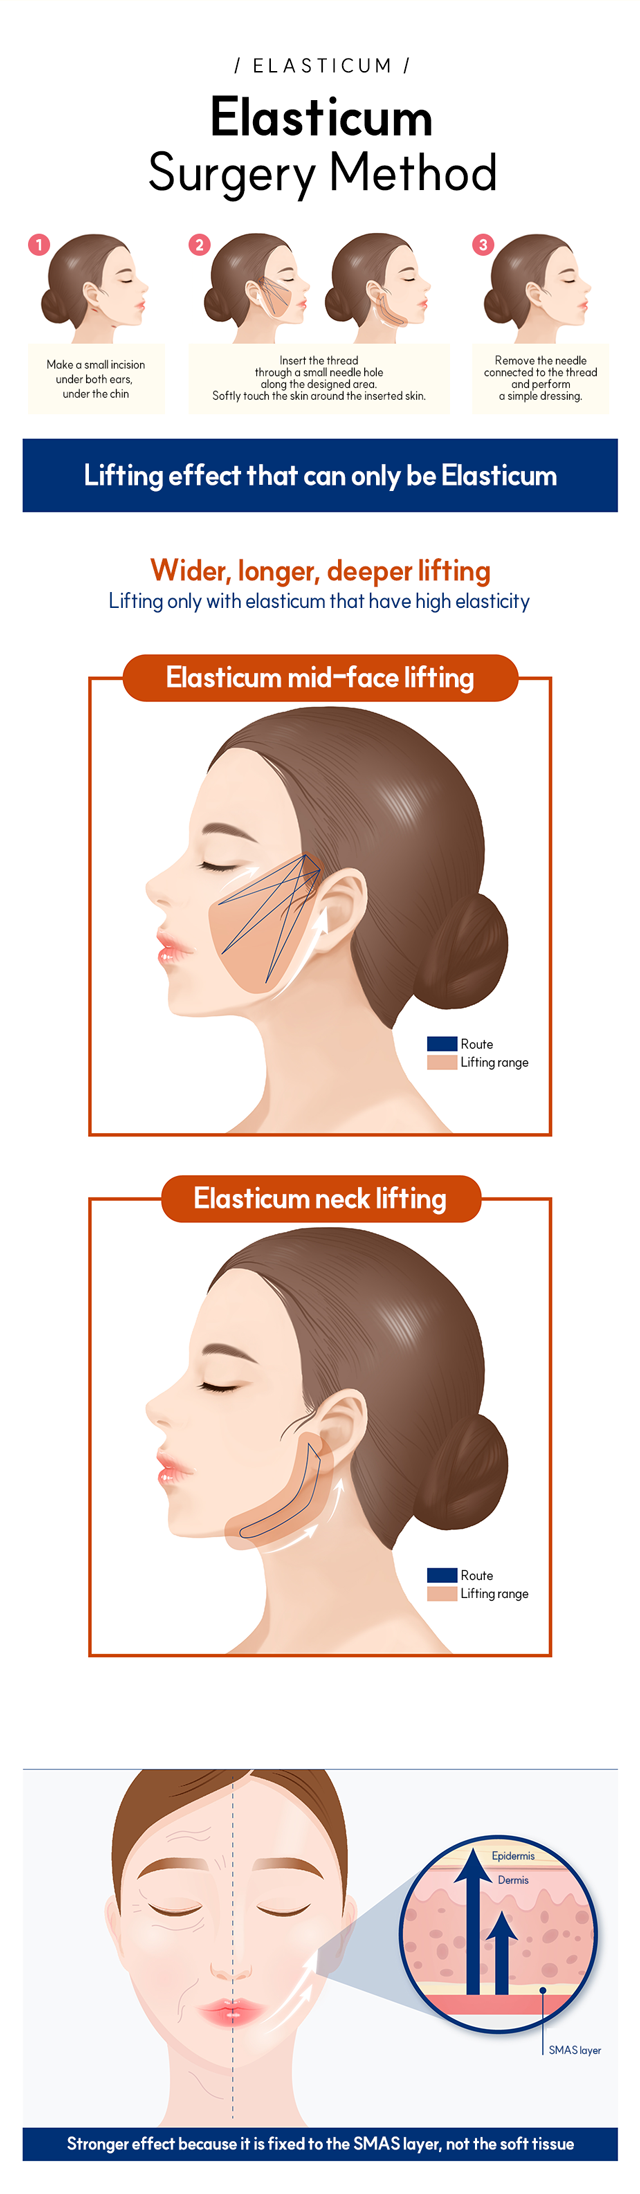 Elasticum Surgery Method - 1. Make a small incision under both ears, under th chin. 2. Insert the thread through a small needle hole along the designed area. softly touch the skin around the inserted skin. 3. Remove the needle connected to the thread and perform a simple dressing.